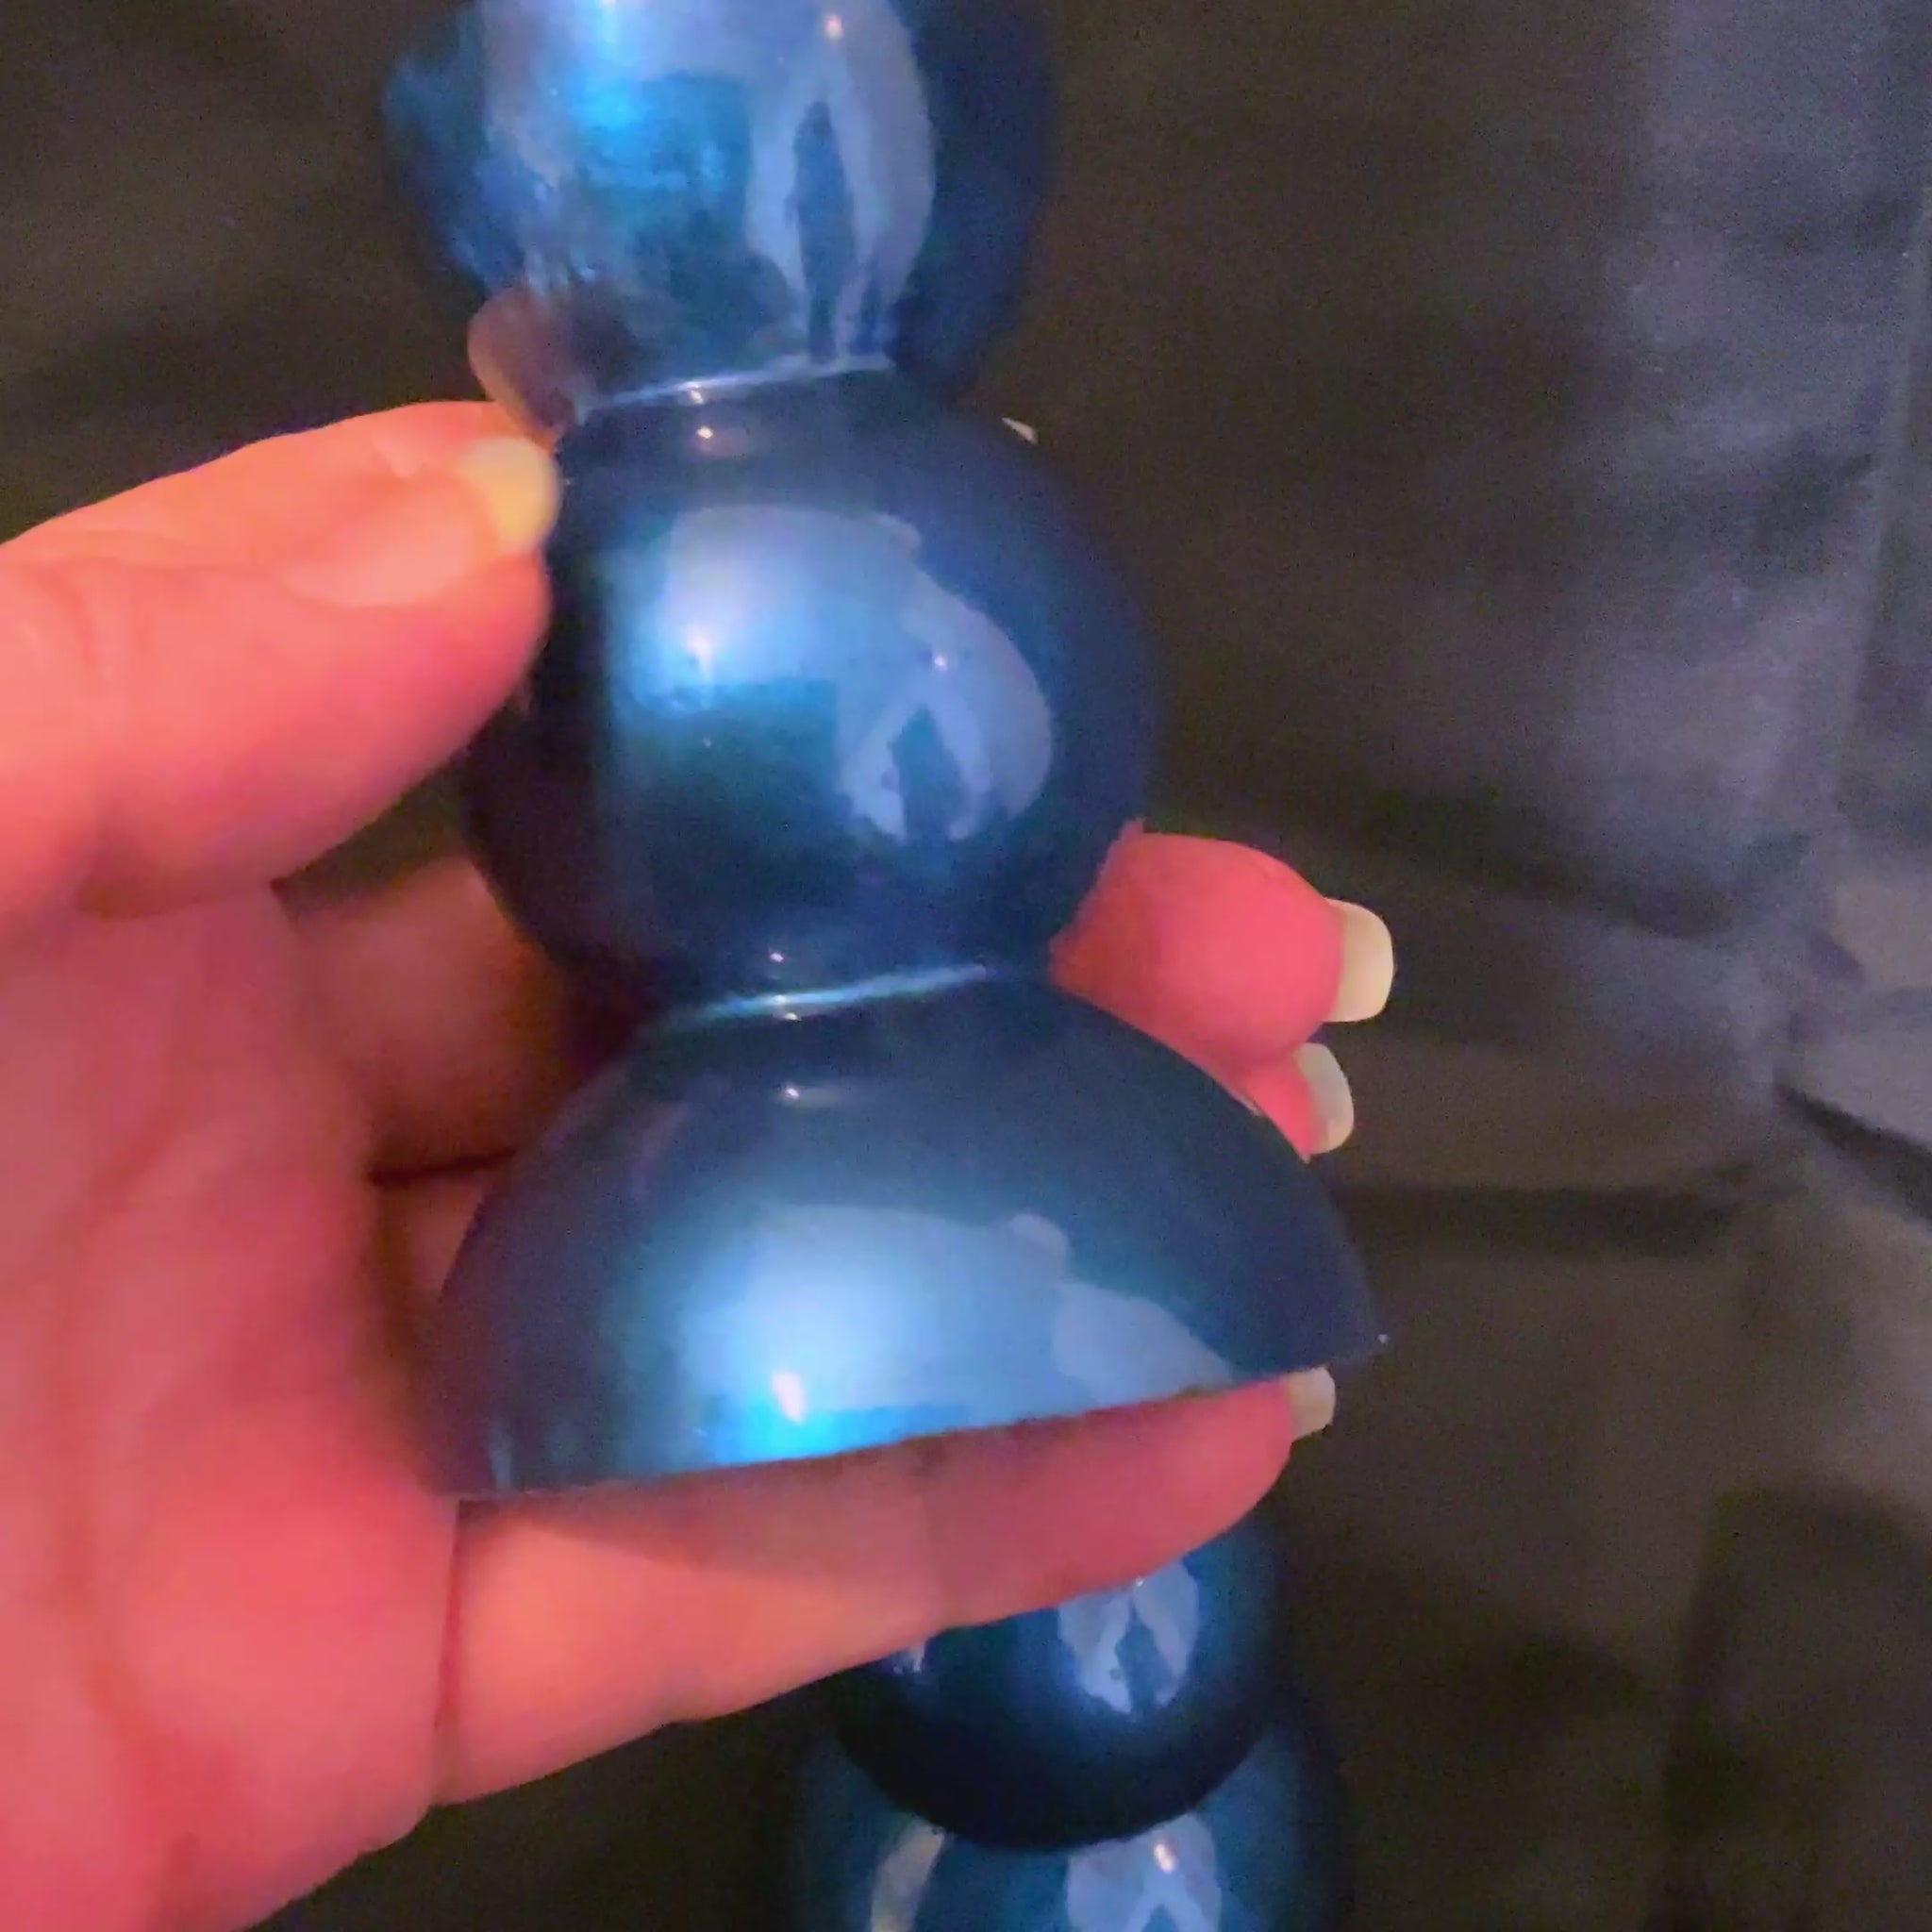 Handmade Pearly Deep Blue Resin Rounded Geometric Candlestick Holders video showing how the pearly blue color looks in the light.